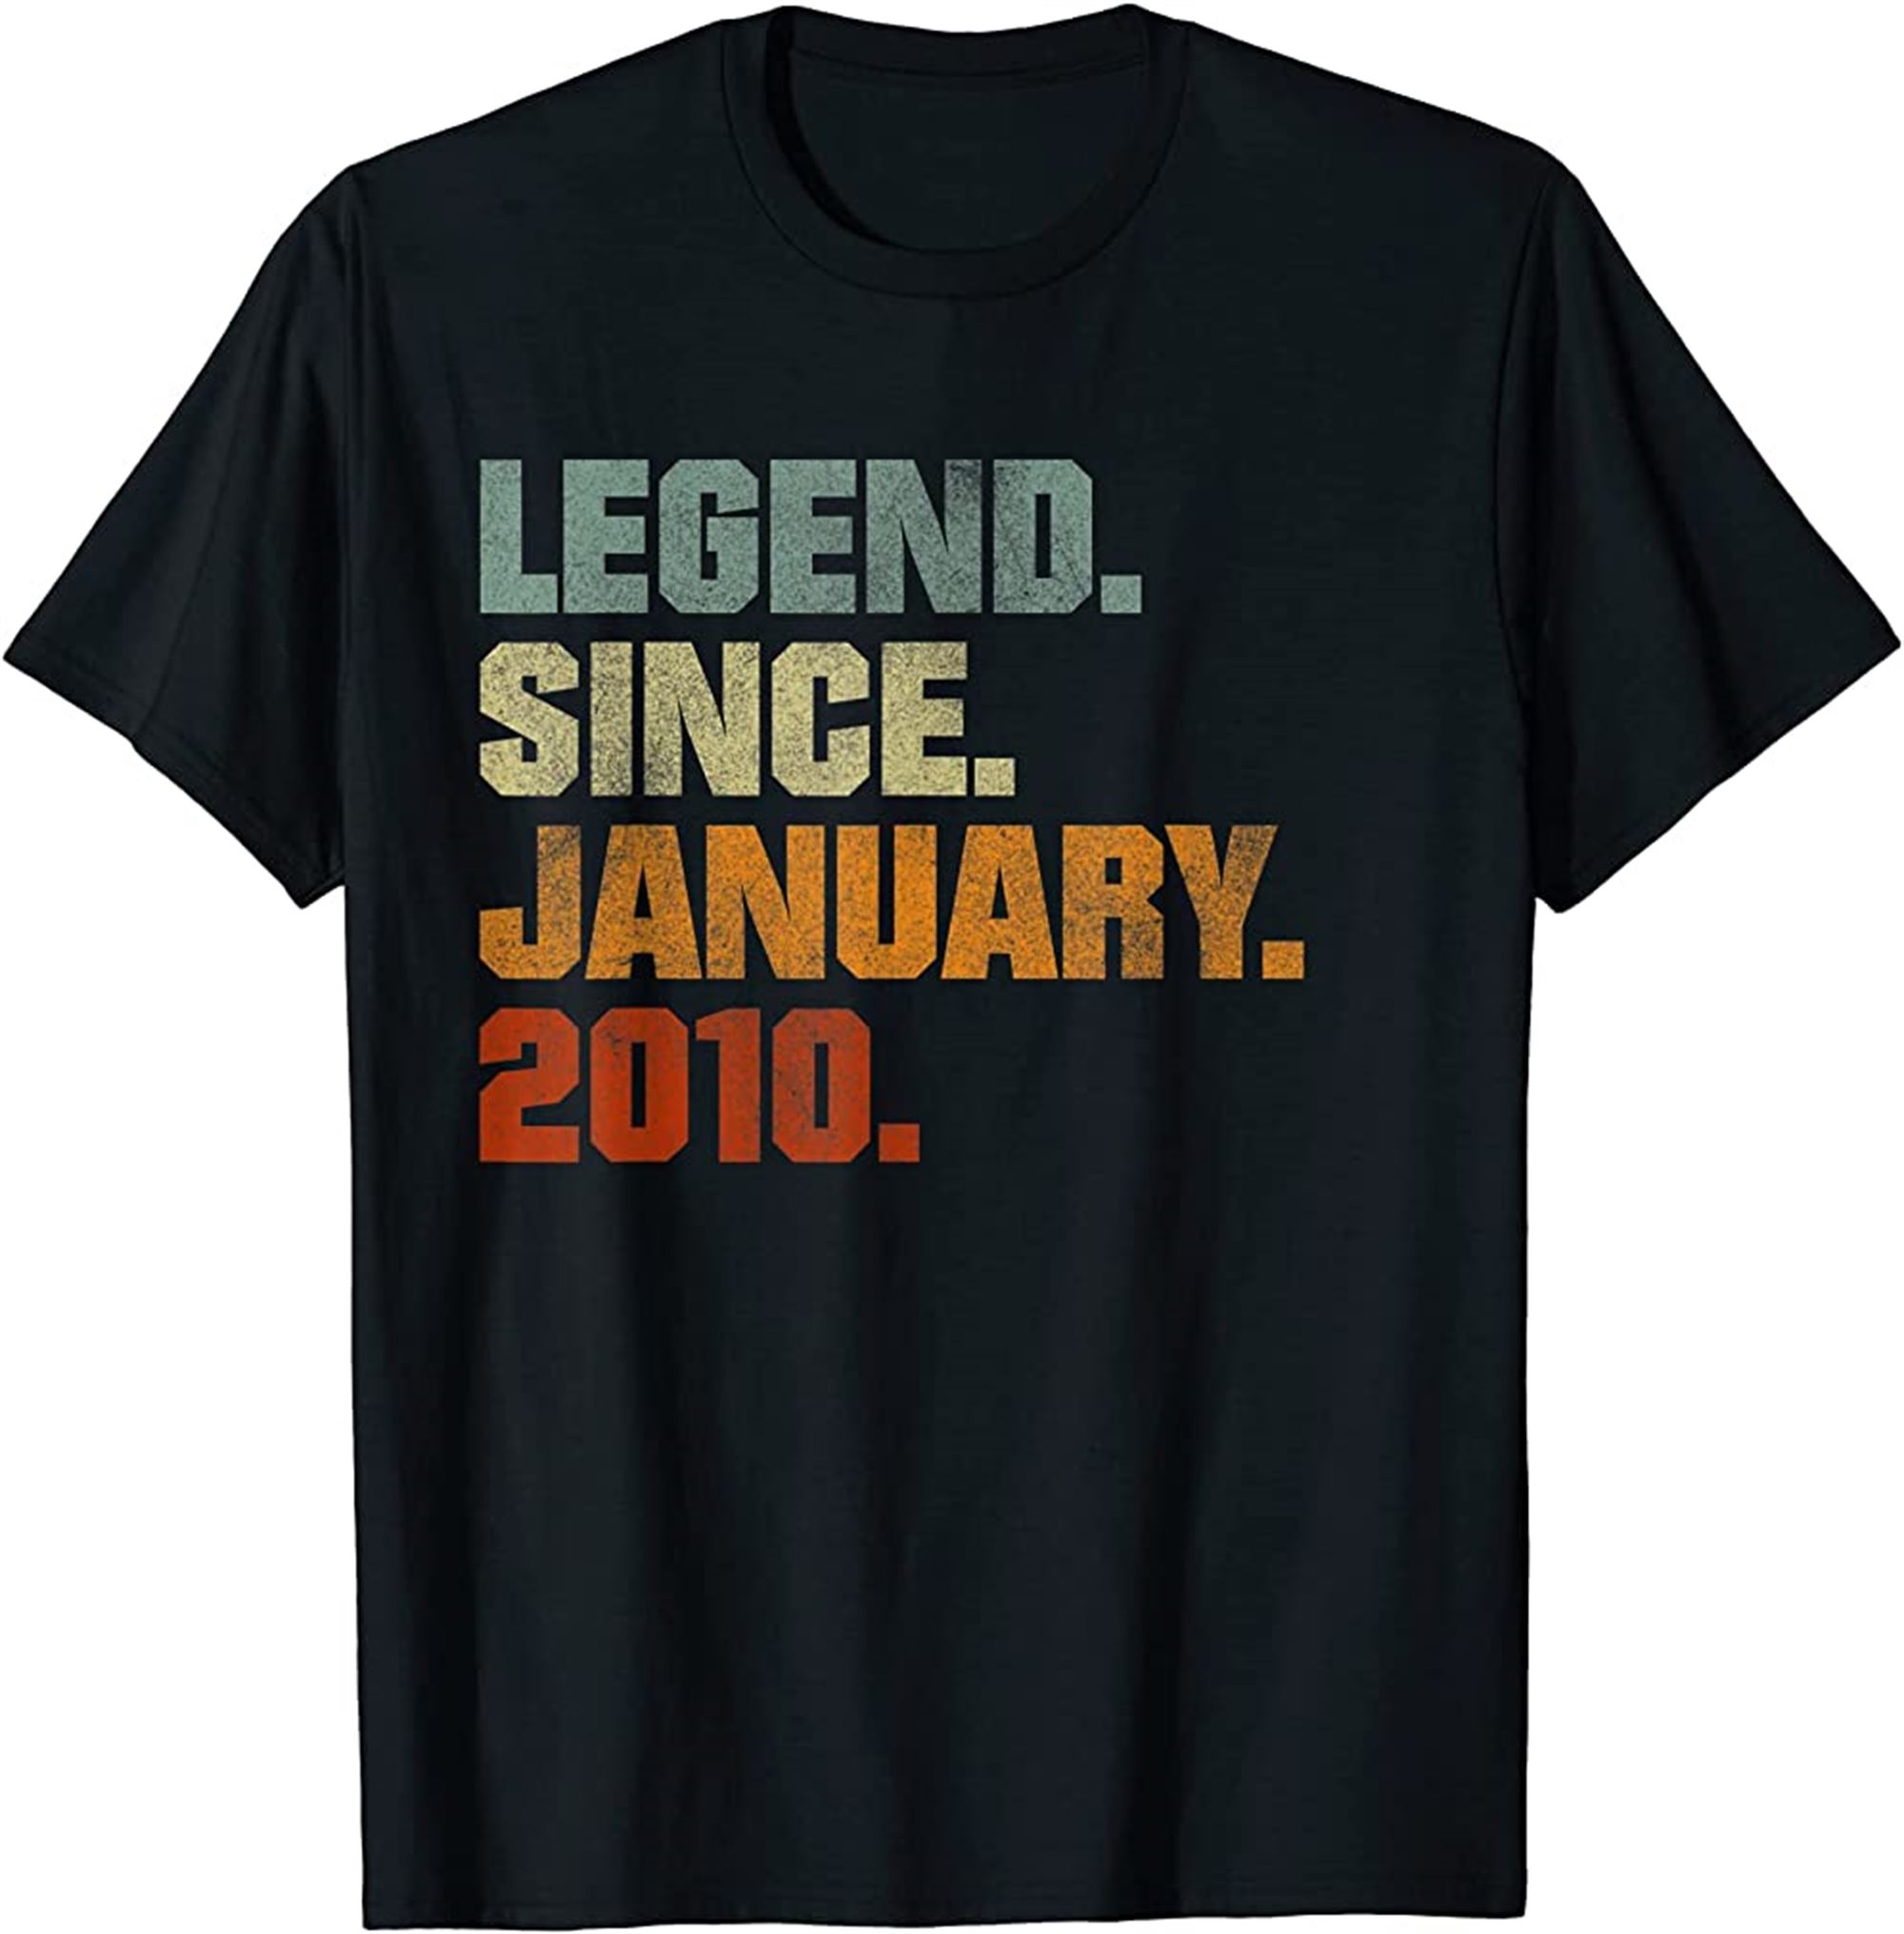 Vintage Boys Girls 12th Birthday Legend Since January 2010 T-shirt Plus Size Up To 5xl